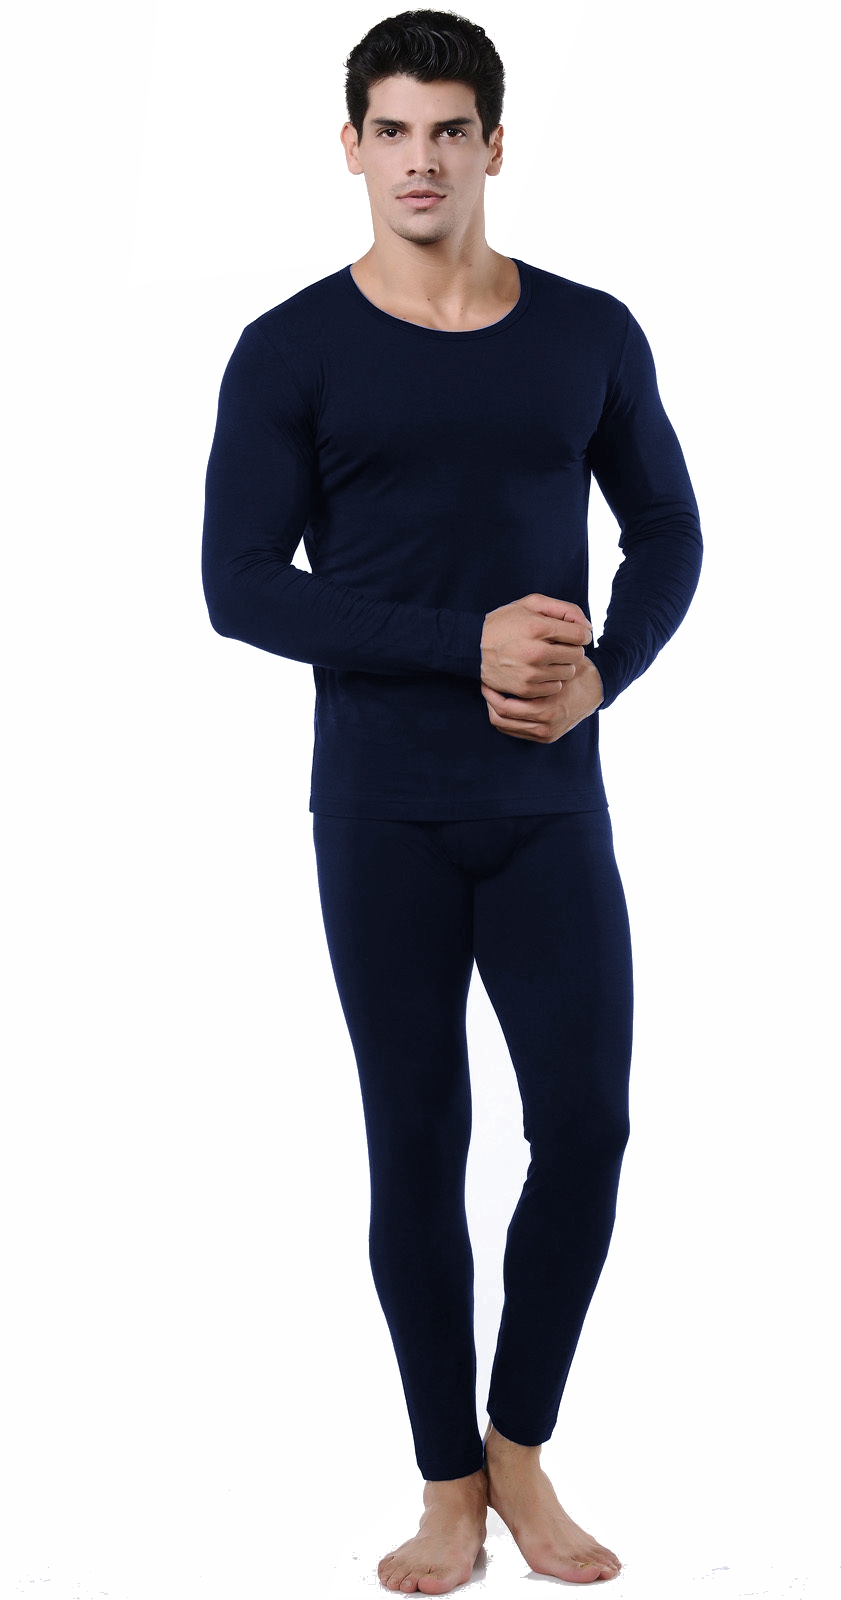 Men’s Ultra-Soft Tagless Fleece Lined Thermal Top & Bottom Underwear Set, Navy Blue, Small - image 2 of 5